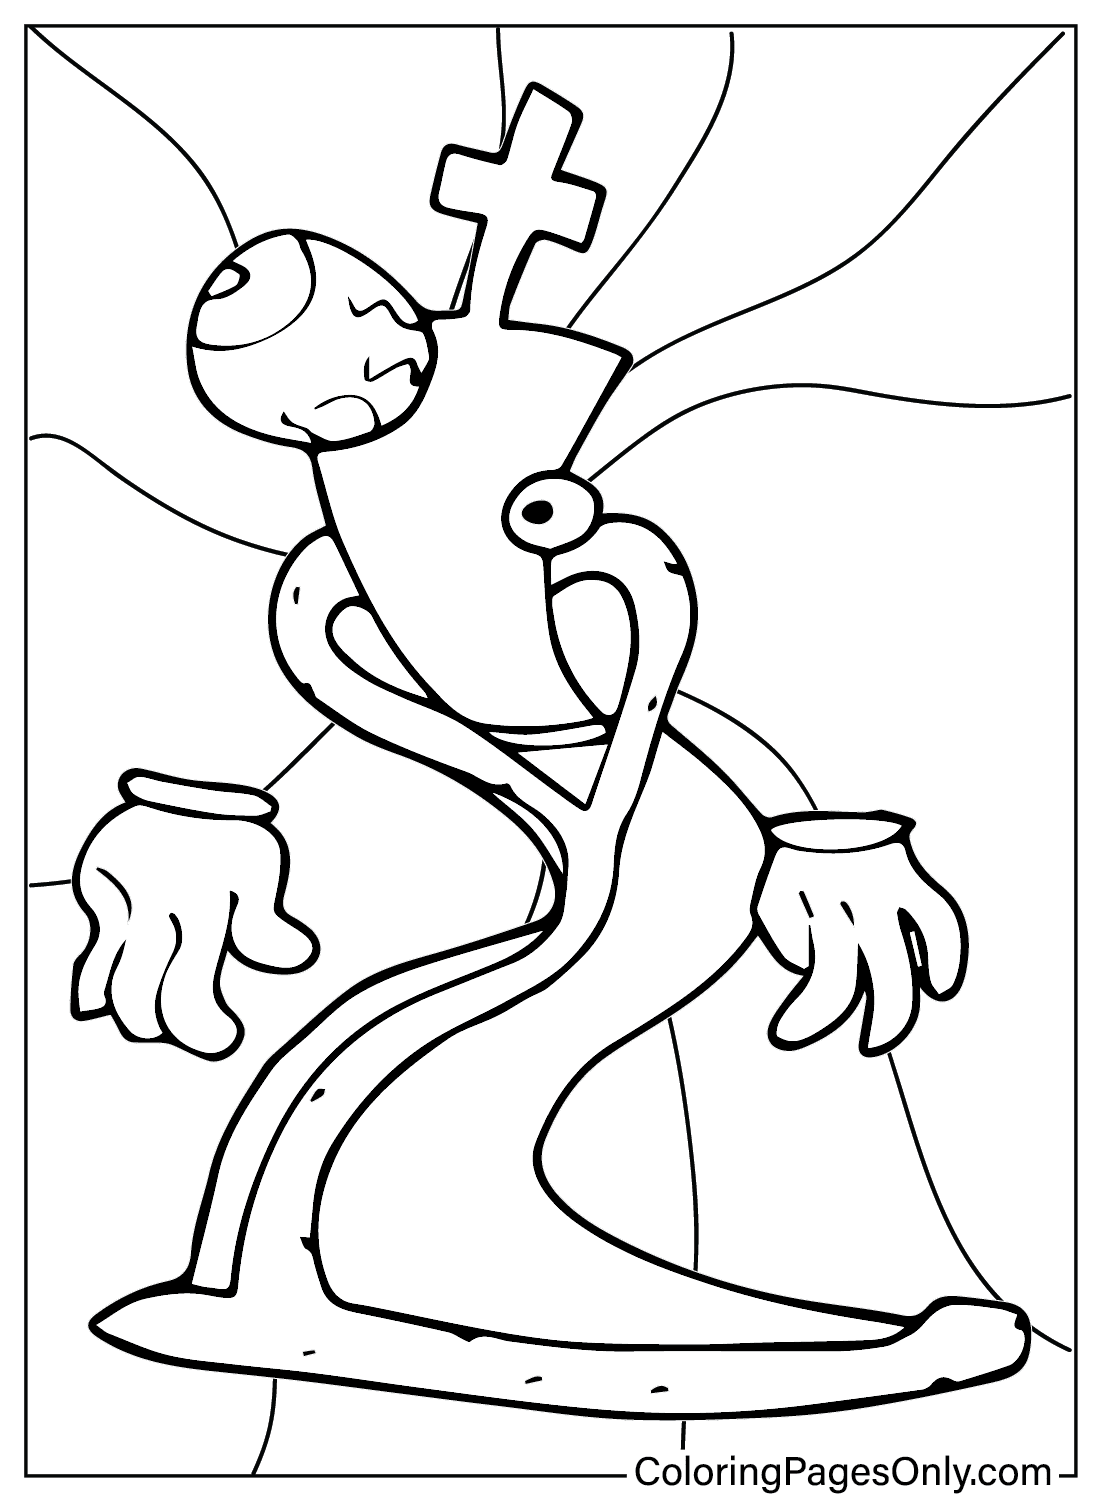 Kinger Coloring Page Free Coloring Page